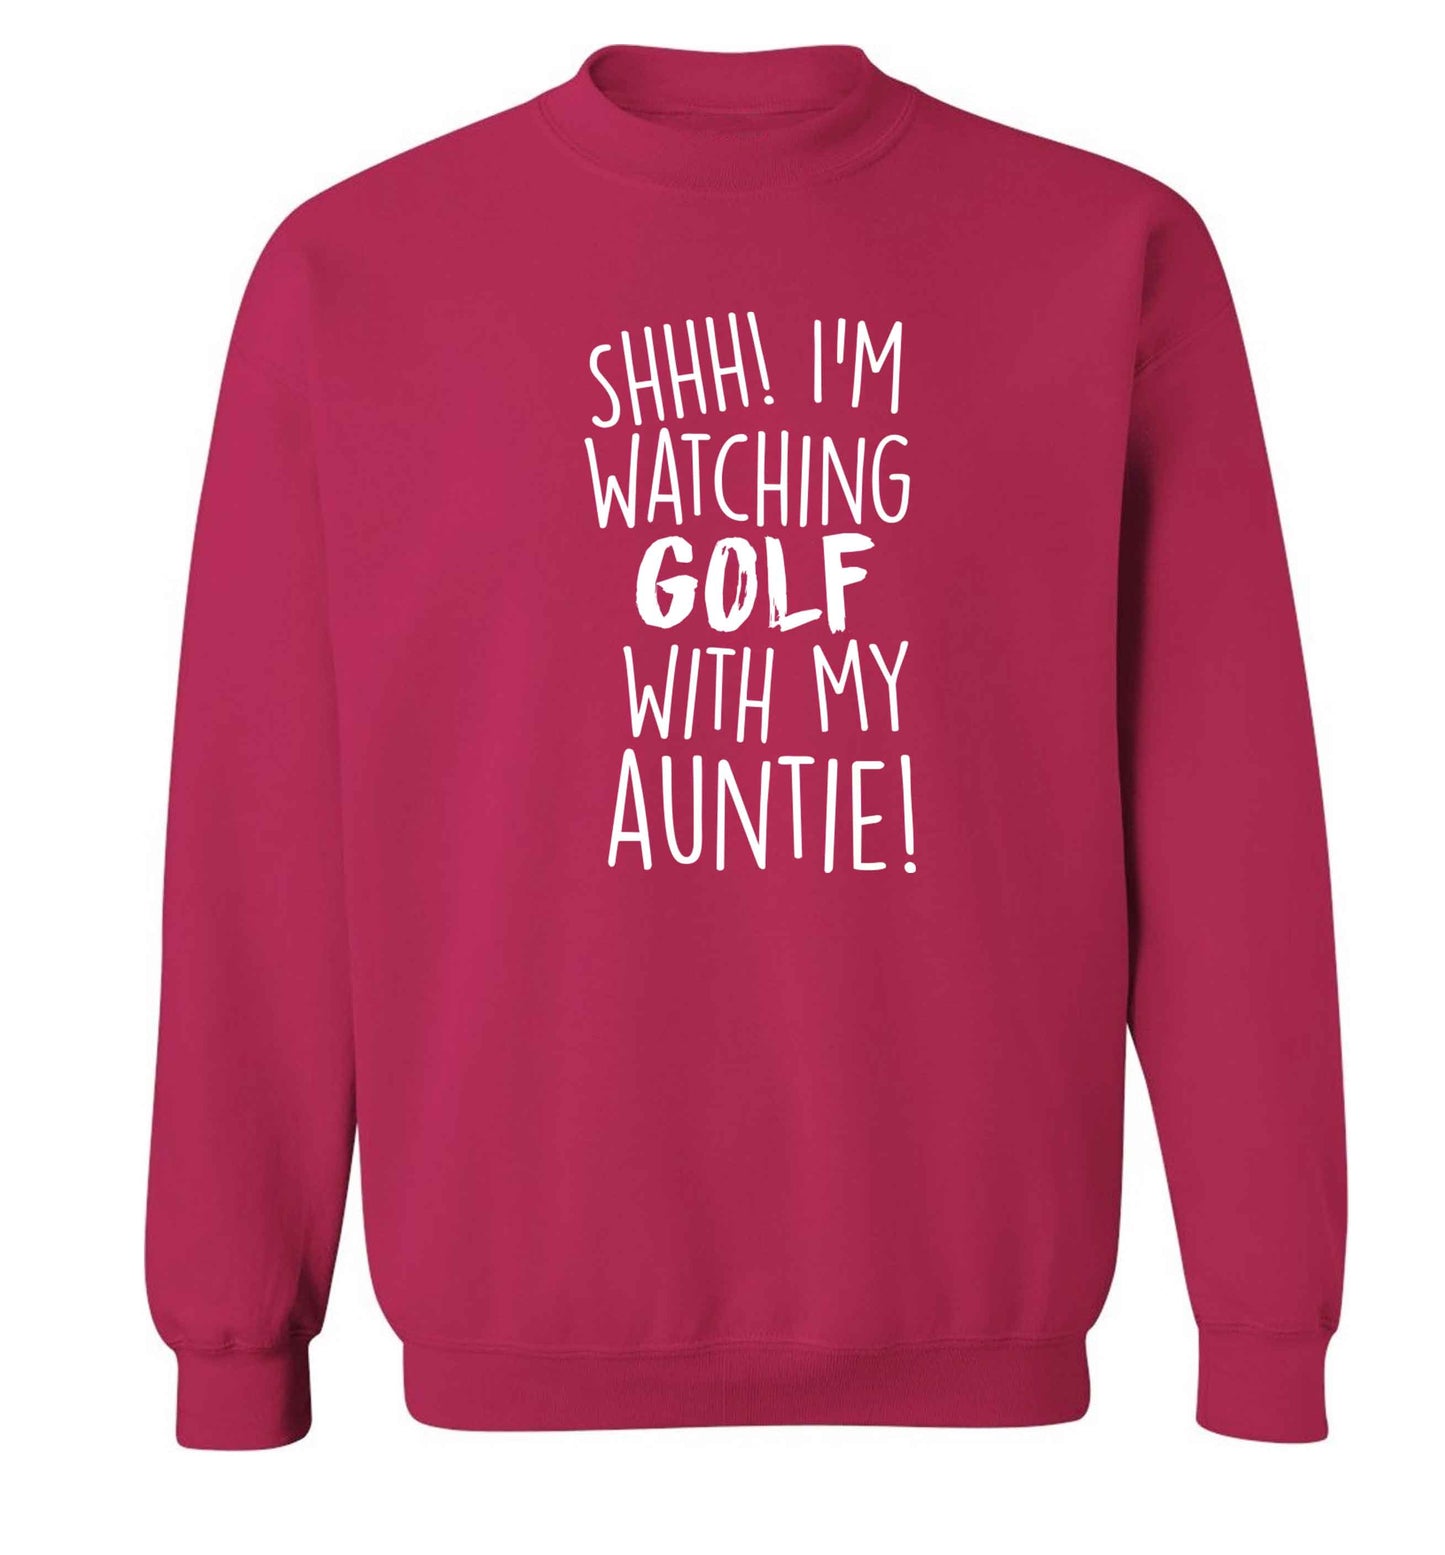 Shh I'm watching golf with my auntie Adult's unisex pink Sweater 2XL